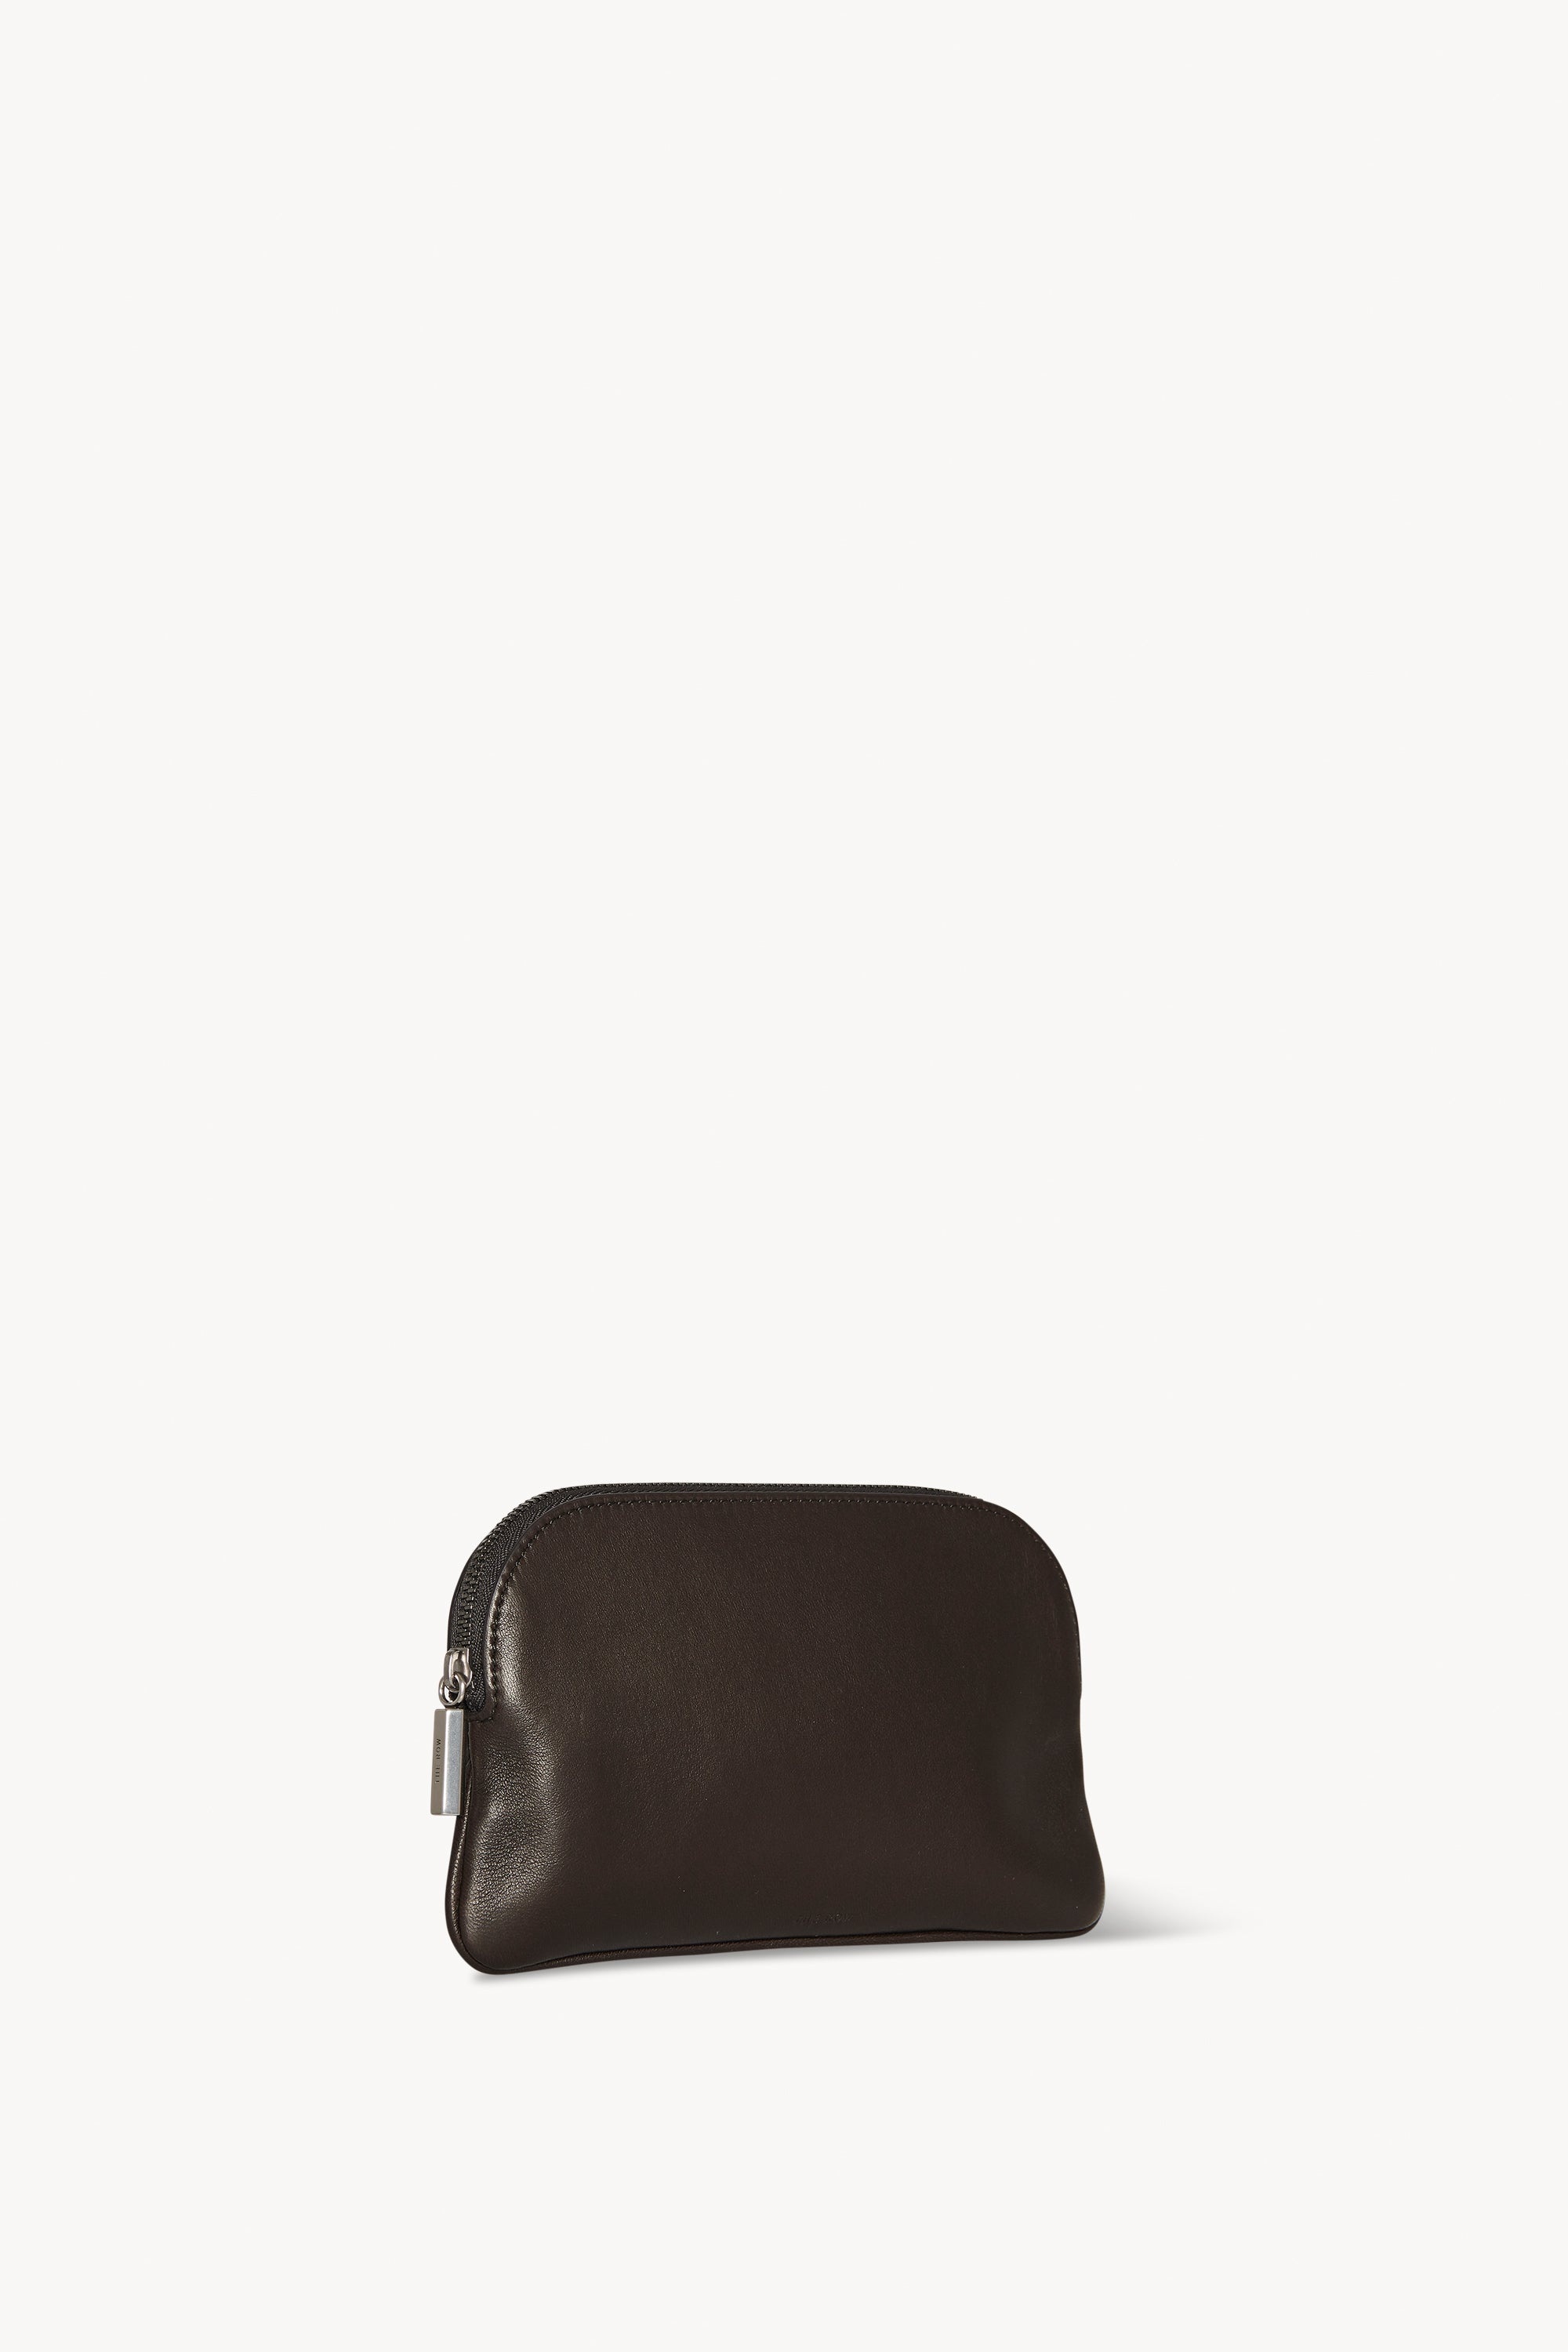 EW Circle Pouch in Leather - 2